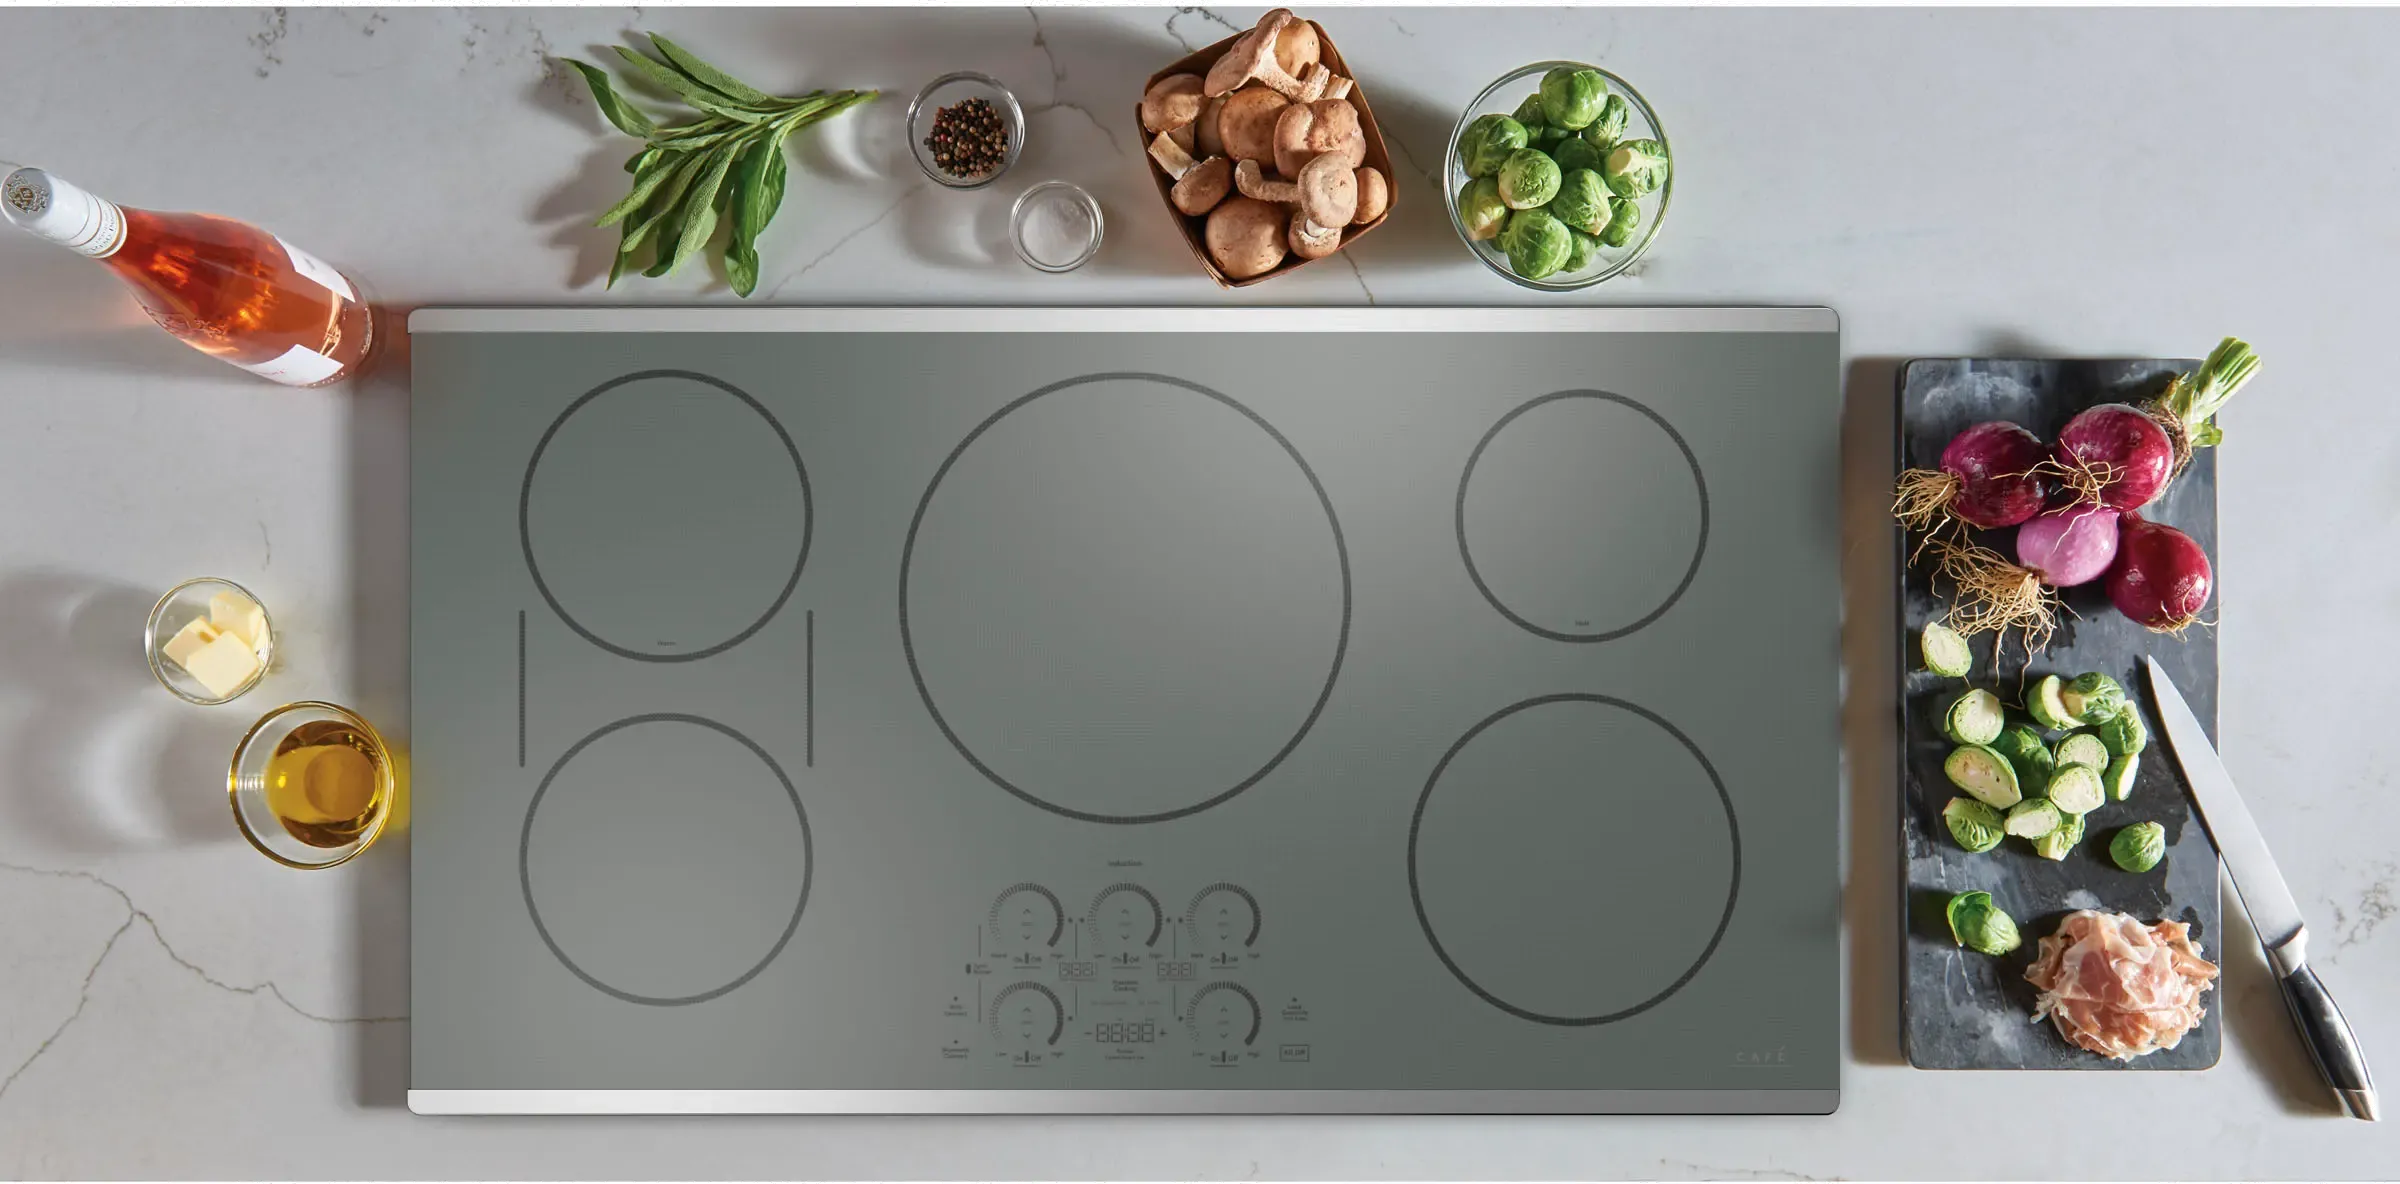 Cafe Electric Cooktop CHP90362TSS